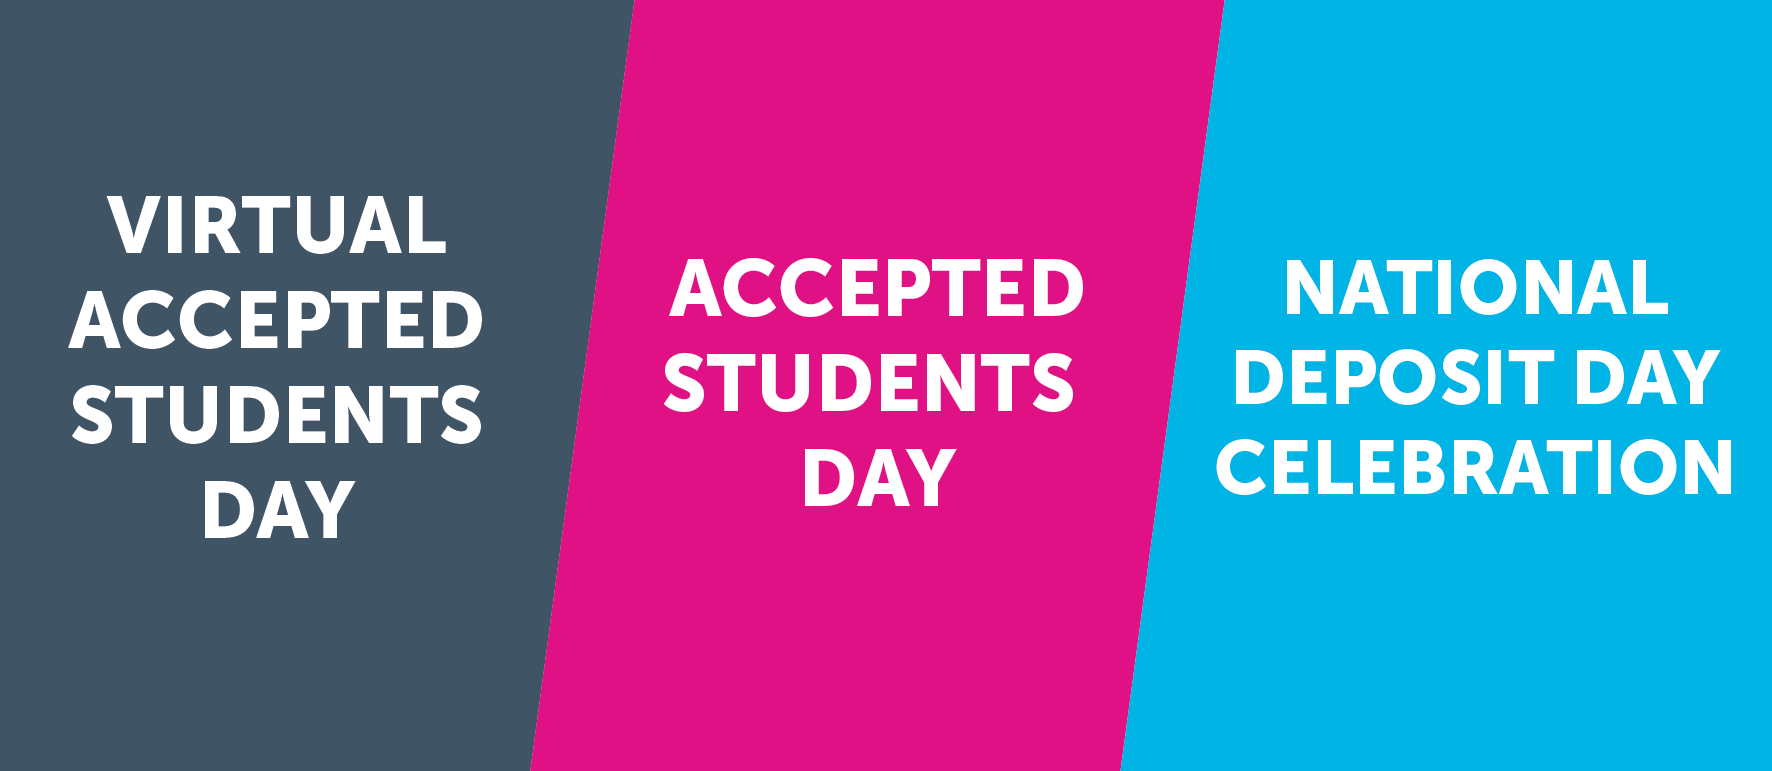 Students day events includes accepted students day and national deposits day